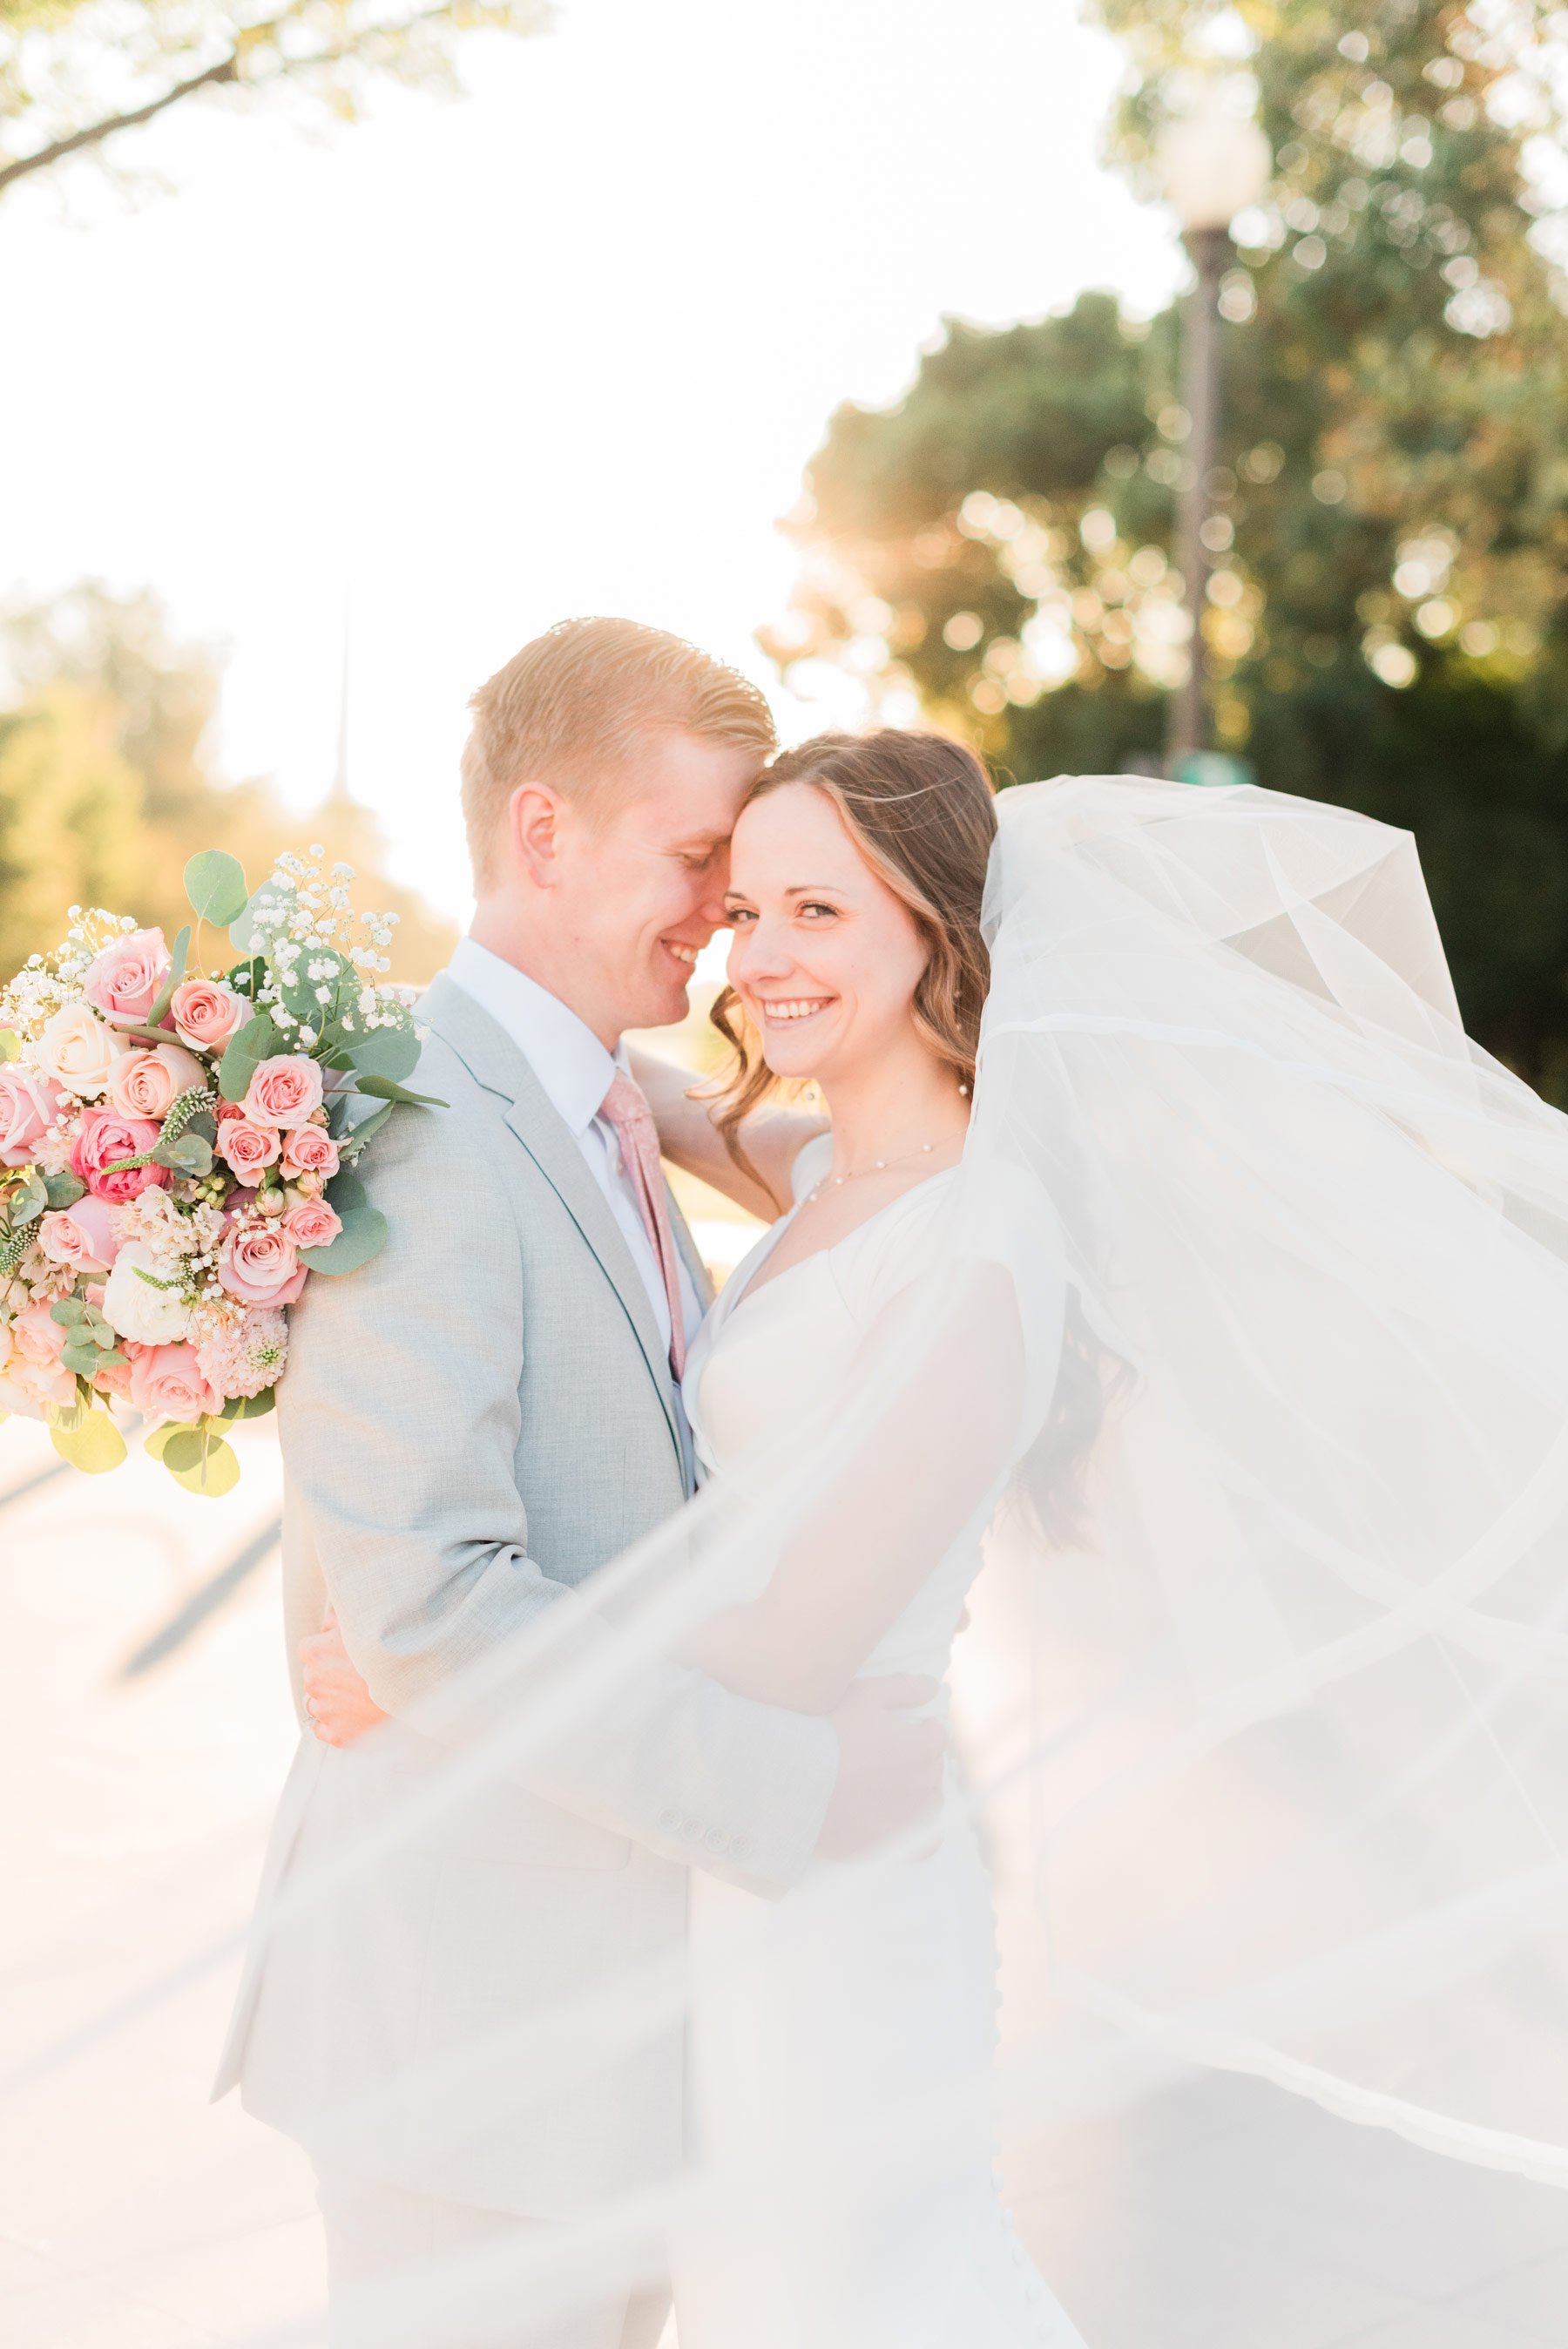    A stunning sunset bridal photo that highlights the LDS bride’s beautiful veil. #washingtondcphotography #washingtondctemple #washingtondcwedding #dcweddingphotographer #washingtondctemplewedding #eastcoastweddingphotographer #sunsetbridals #modest